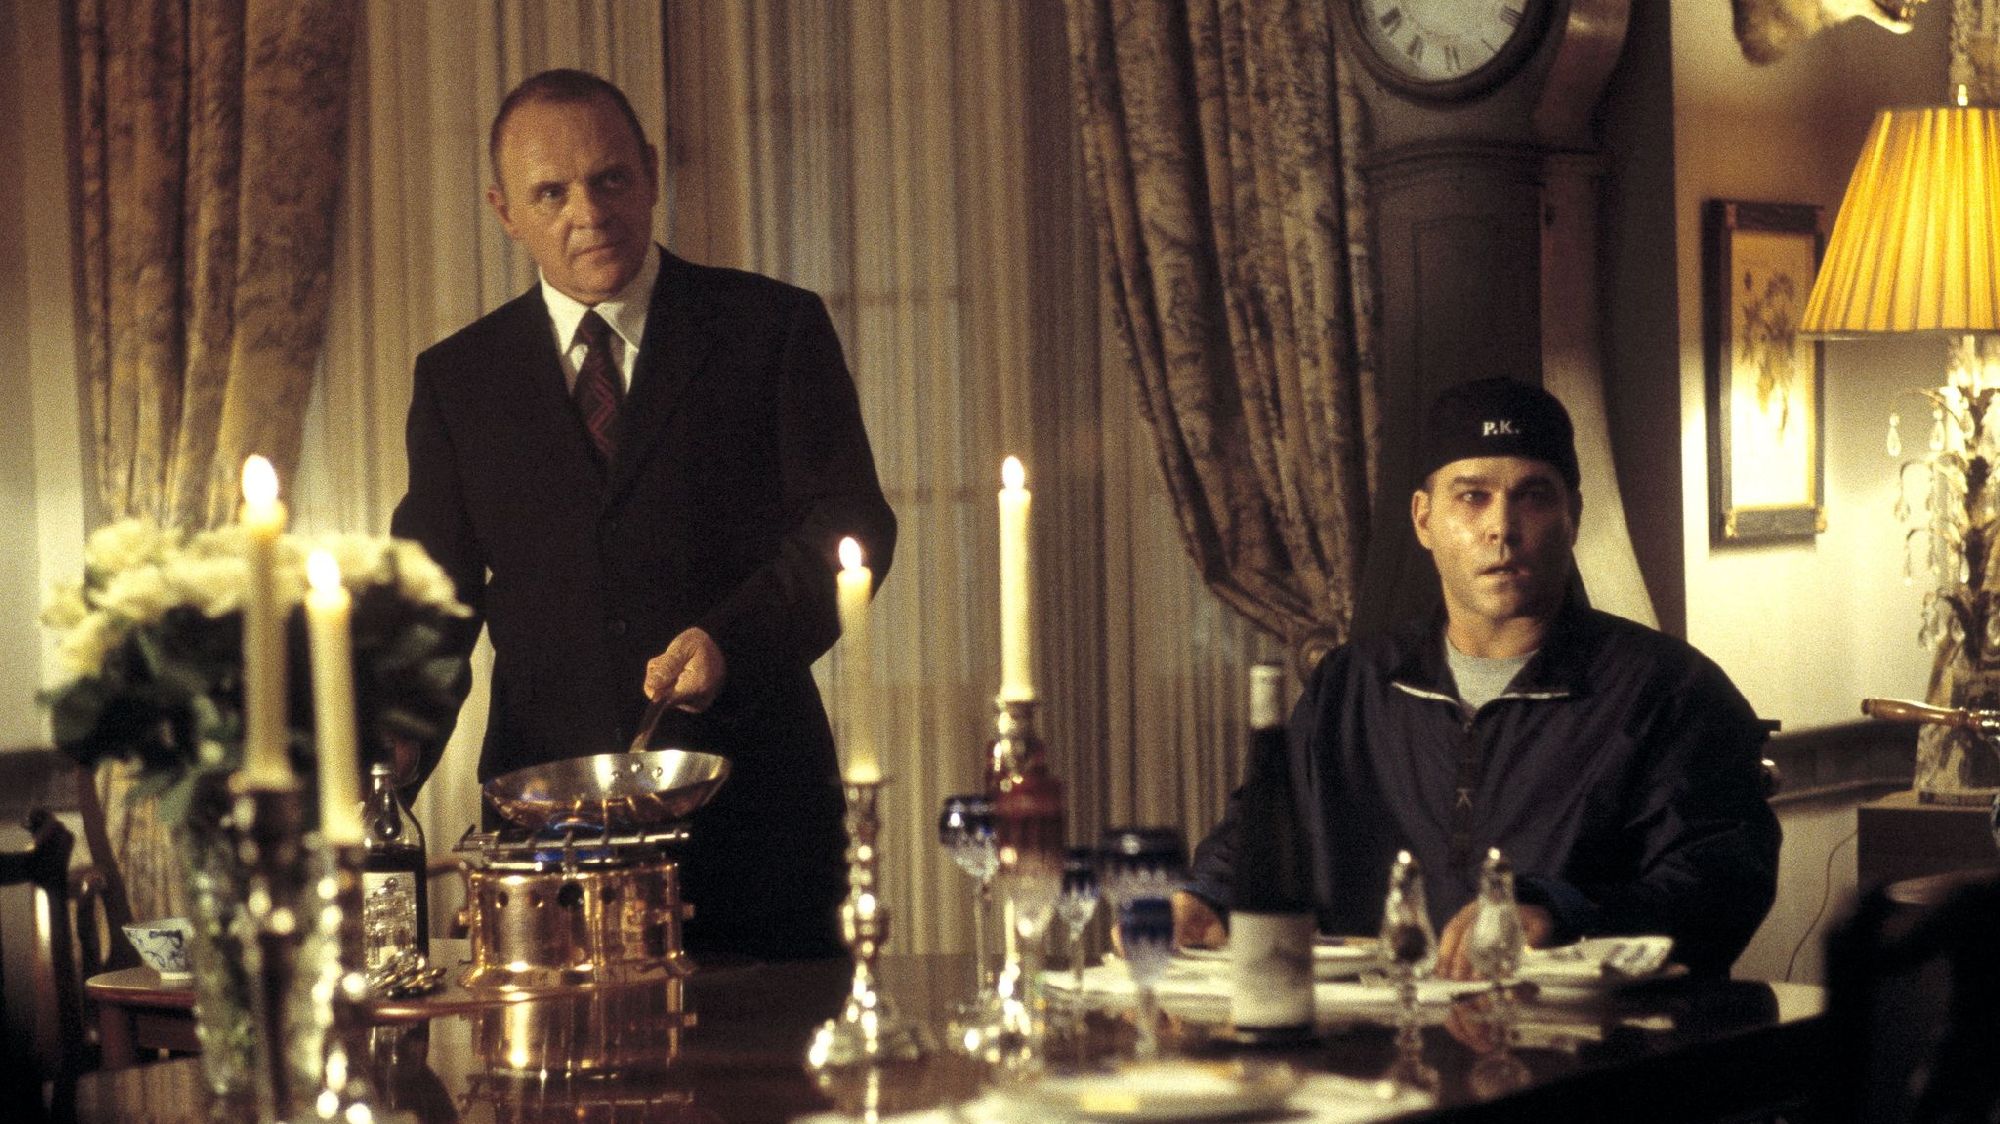 Anthony Hopkins with Liotta in one of the most remembered moments of the movie "Hannibal".  (Netflix)